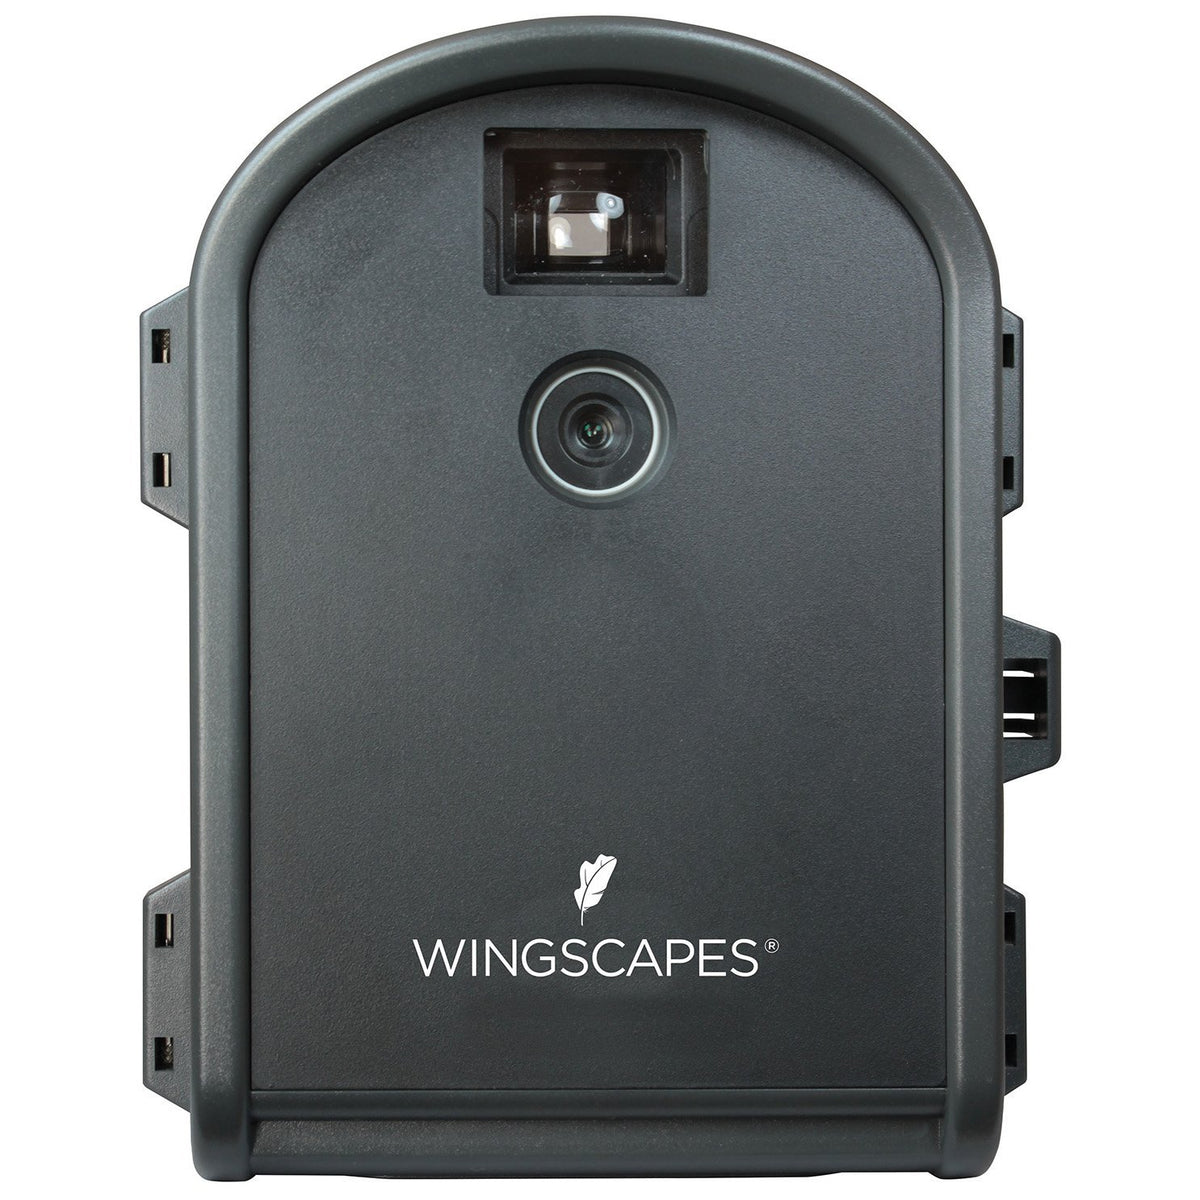 Wingscapes WCT-00122 Timelapse Camera, 6"